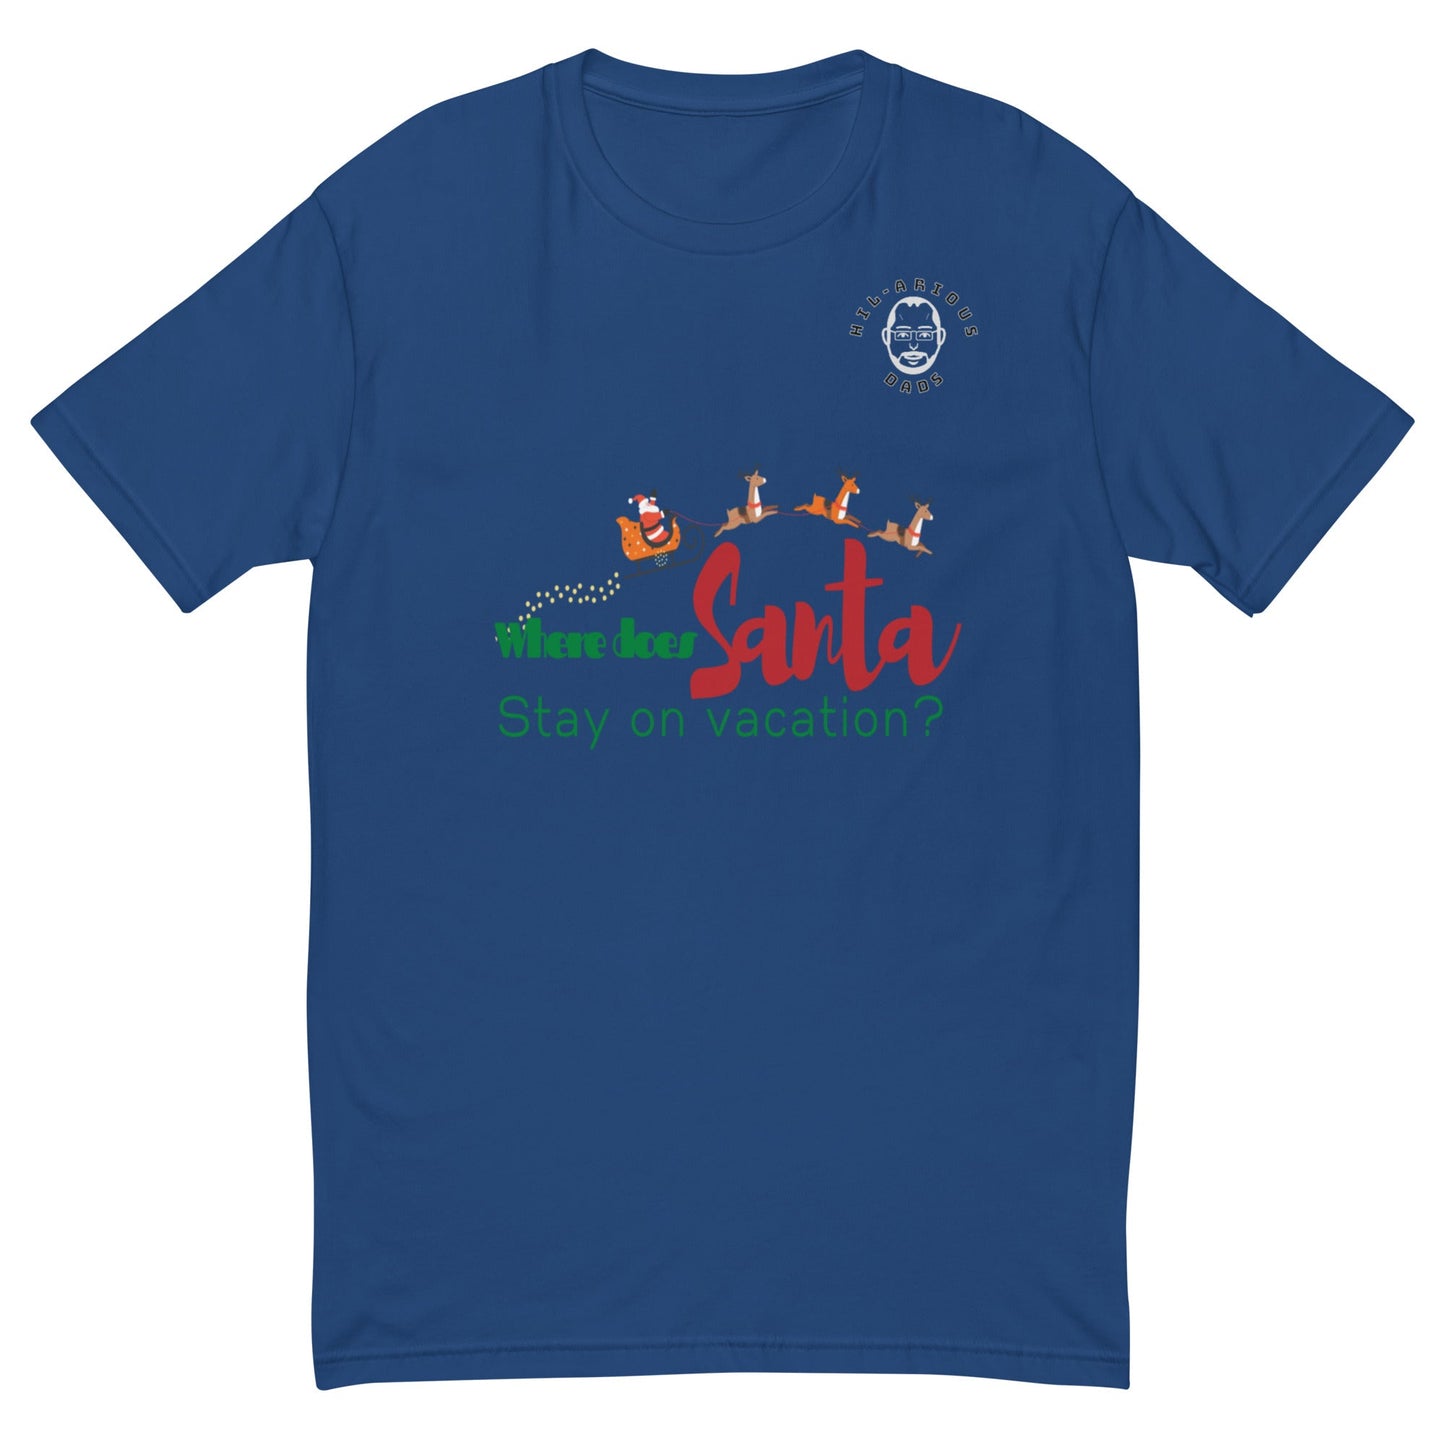 Where does Santa stay on vacation?-T-shirt - Hil-arious Dads